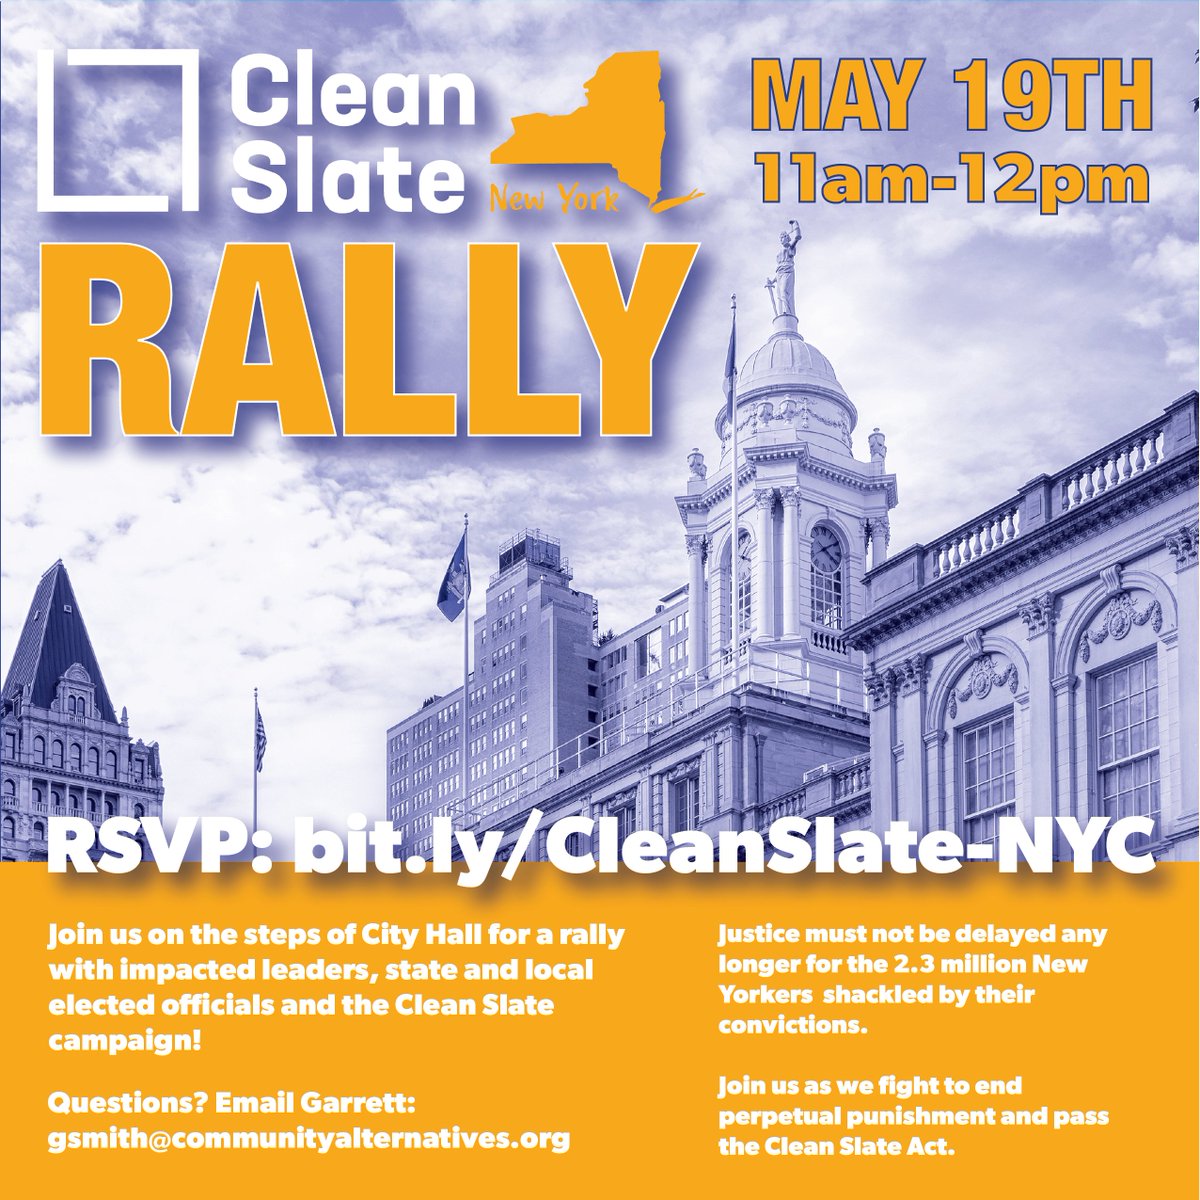 TOMORROW 11am: JOIN US at City Hall in support of the #CleanSlateNY campaign. RSVP Link: docs.google.com/forms/d/e/1FAI…